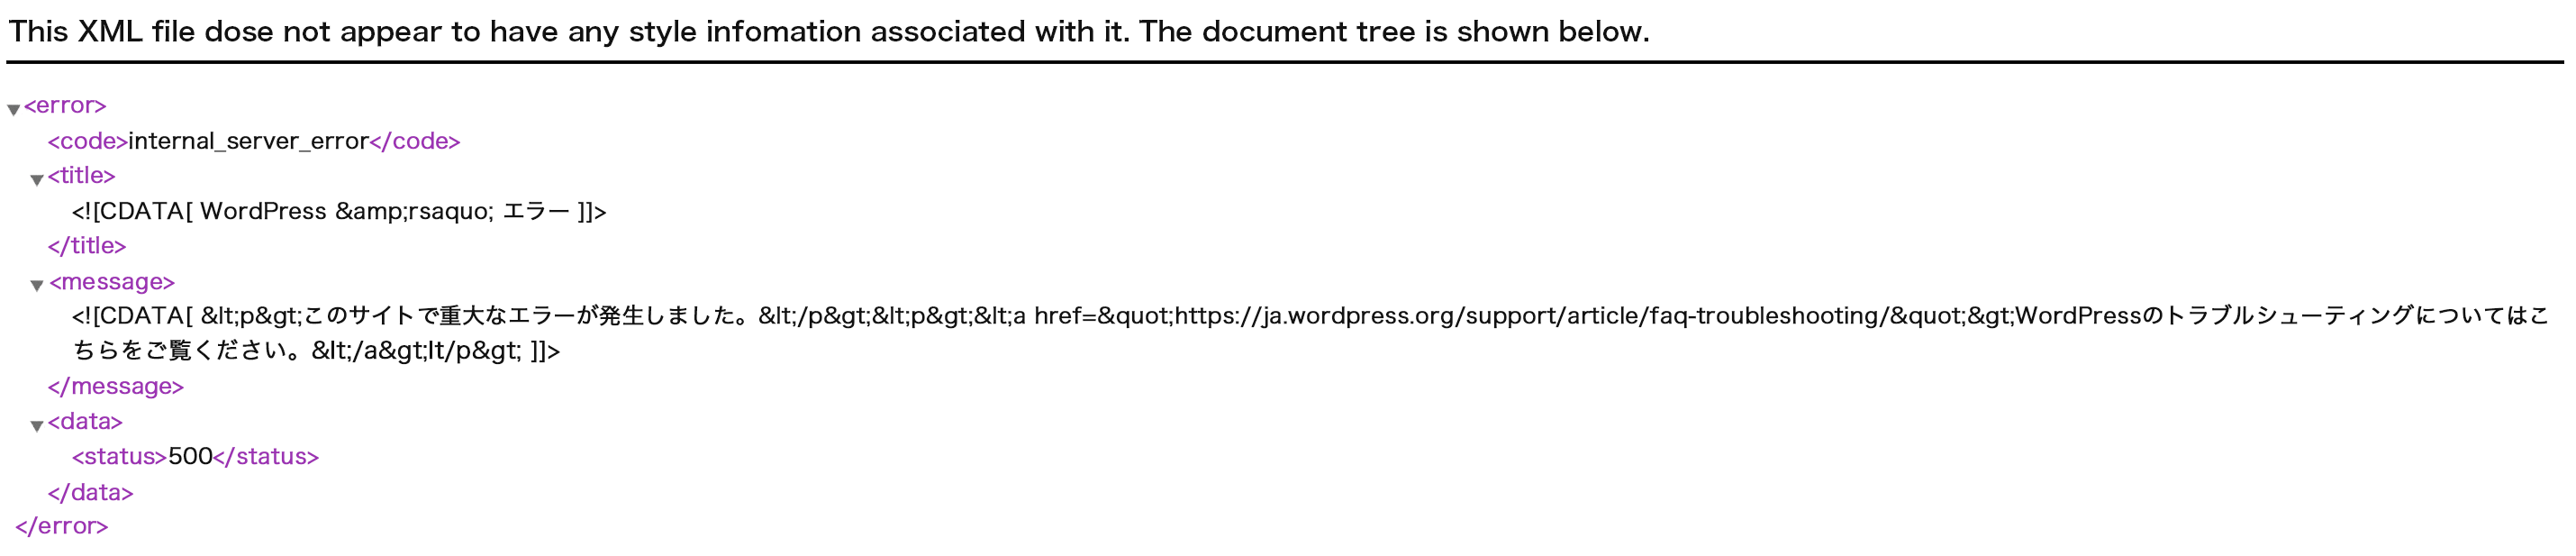 This XML file dose not appear to have any style infomation associated with it. The document tree is shown below.
<error>
 <code>internal_server_error</code>
 <title>
  <![CDATA[ WordPress › エラー ]]>
 </title>
 <message>
<![CDATA[ <p>このサイトで重大なエラーが発生しました。</p><p><a href="https://ja.wordpress.org/support/article/faq-troubleshooting/">WordPressのトラブルシューティングについてはこちらをご覧ください。</a>lt/p> ]]>
 </message>
 <data>
  <status>500</status>
 </data>
</error>